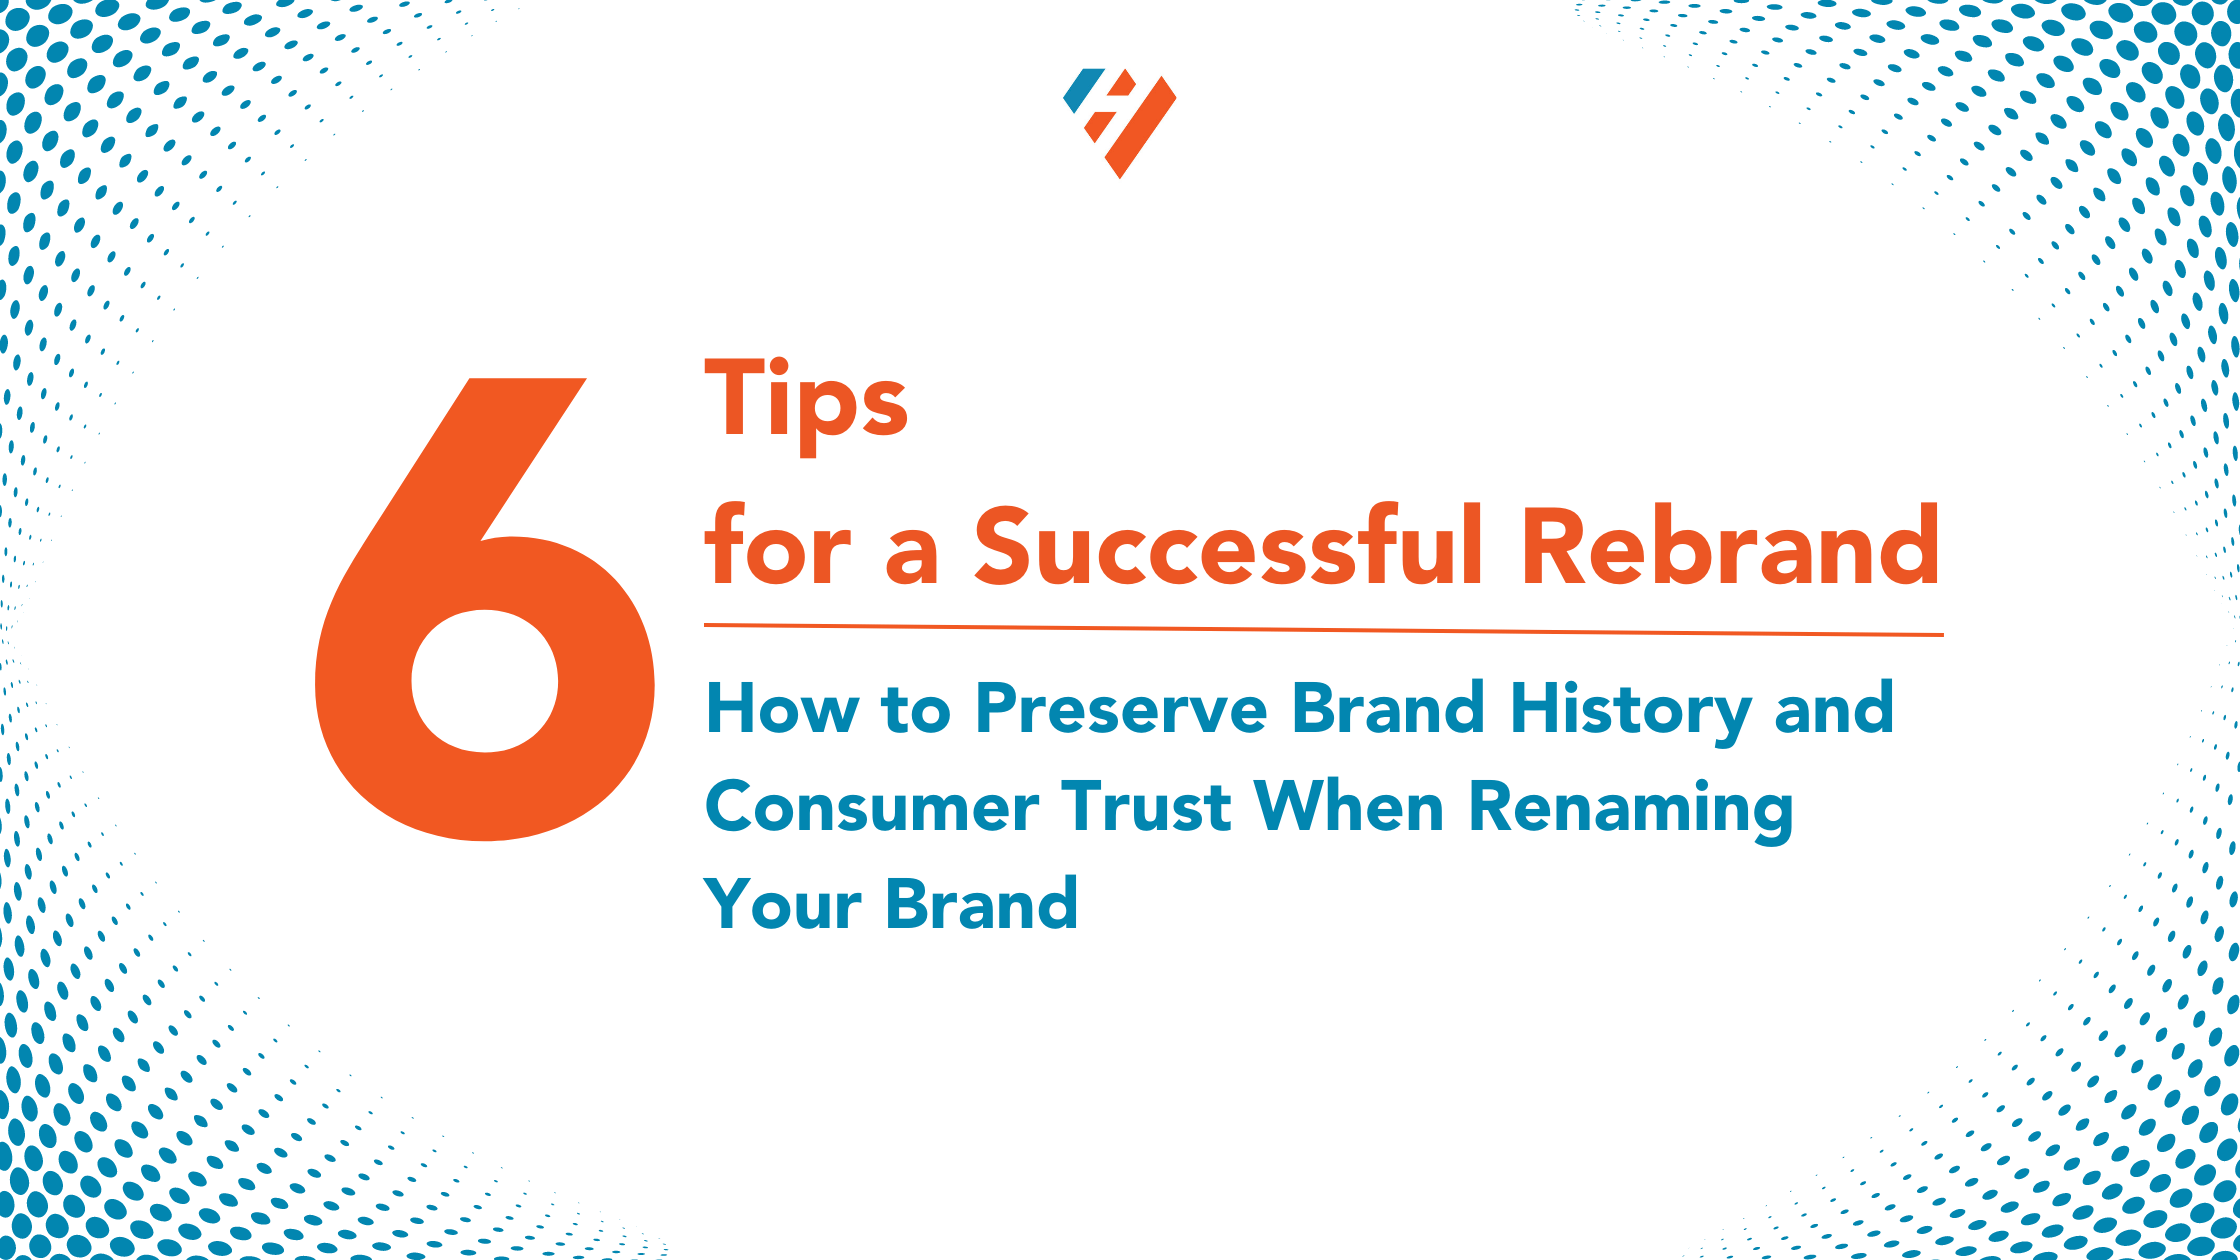 6 Tips for a Successful Rebrand